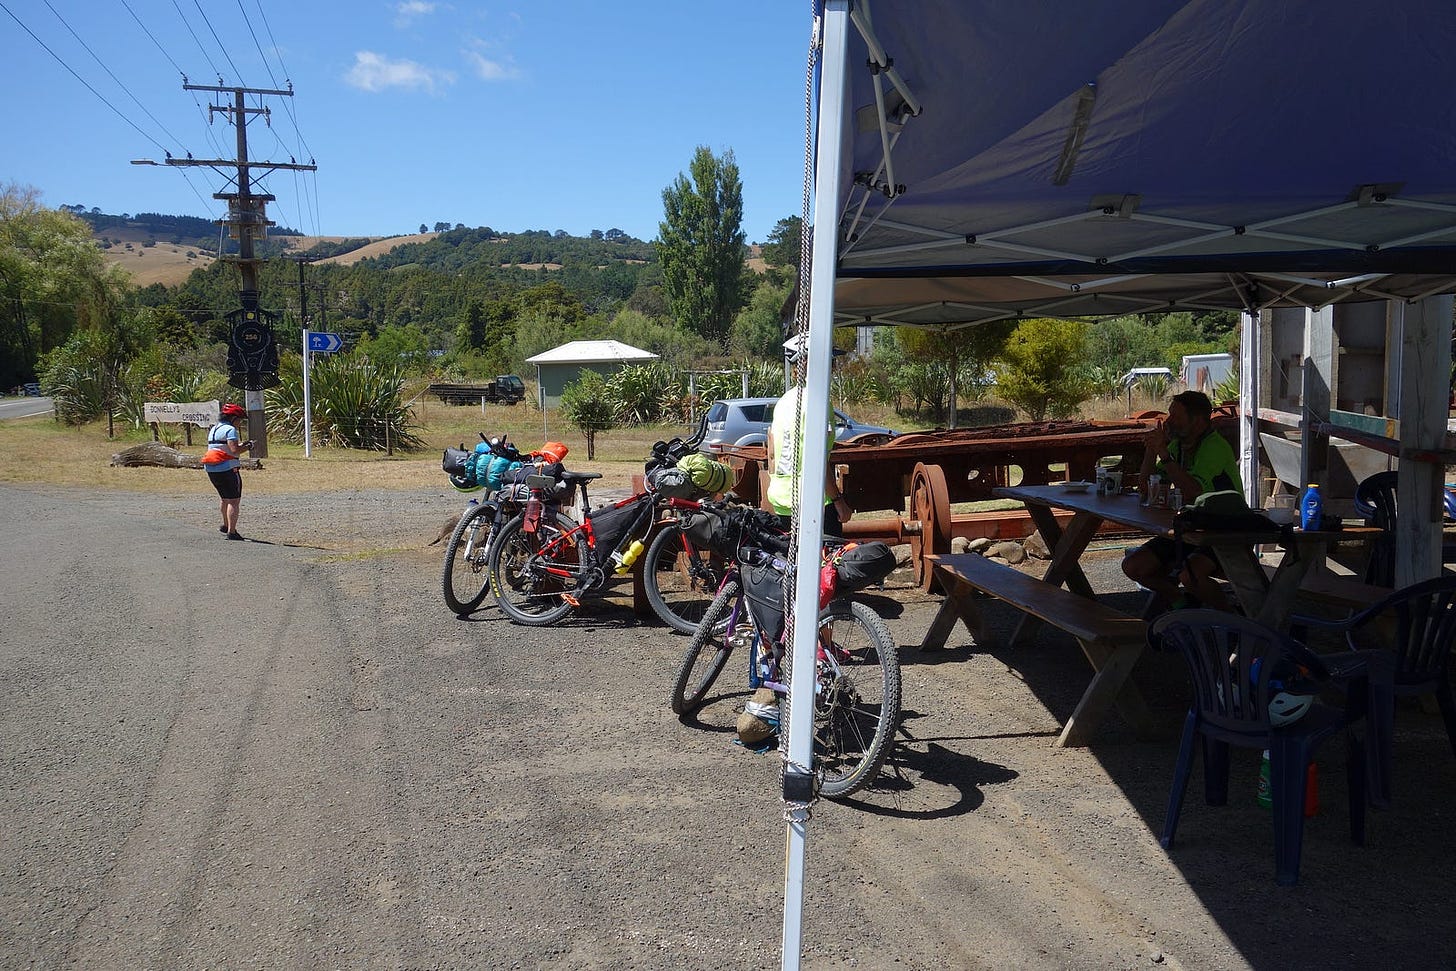 A group of bikepackers at Donnelly’s crossing, a rest stop on a gravel road.